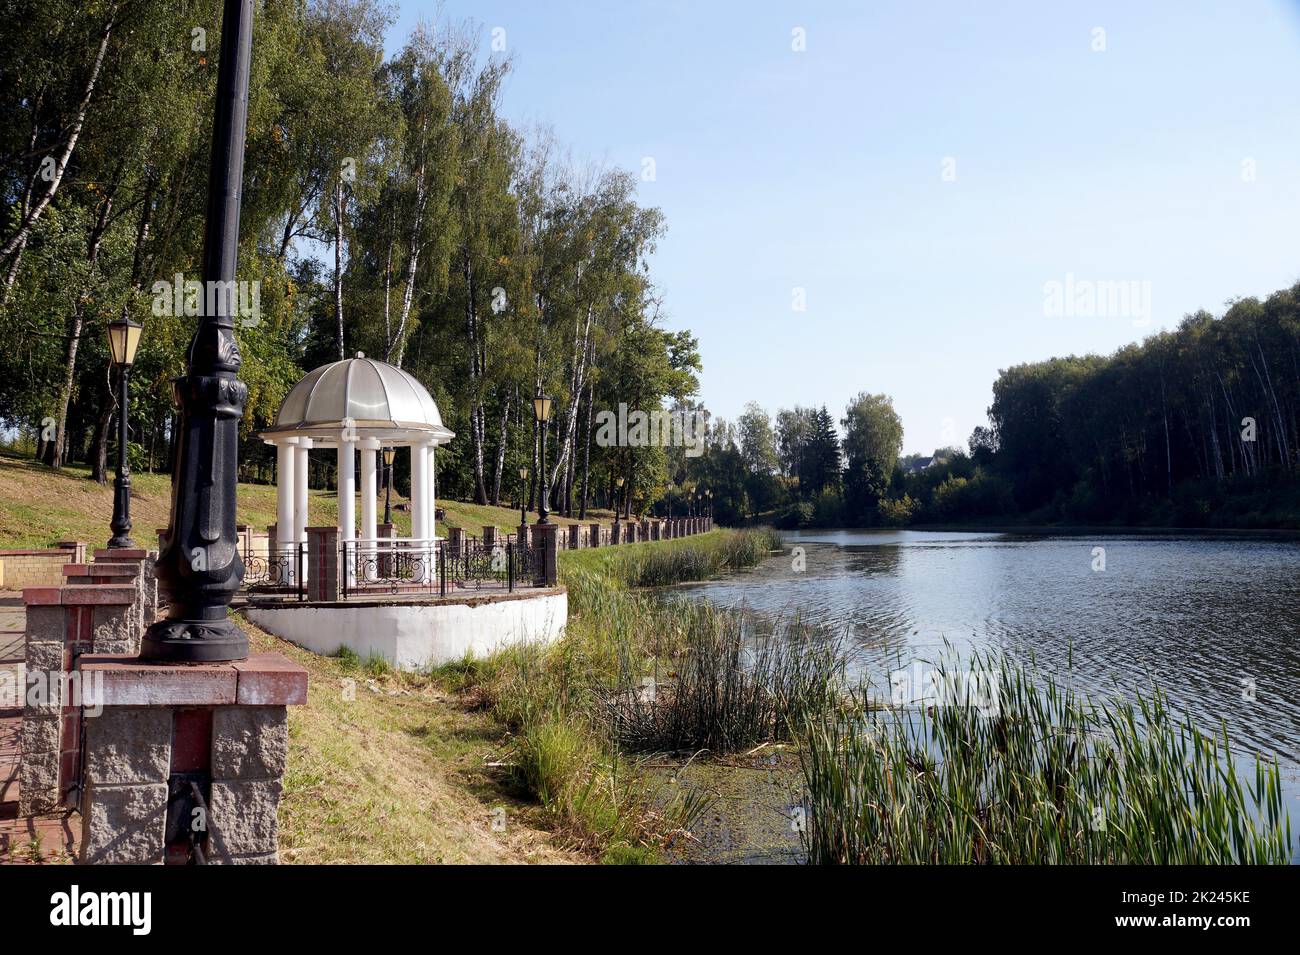 Rotunda on the Bank of a pond in the city Park in Gorki, Belarus Stock Photo